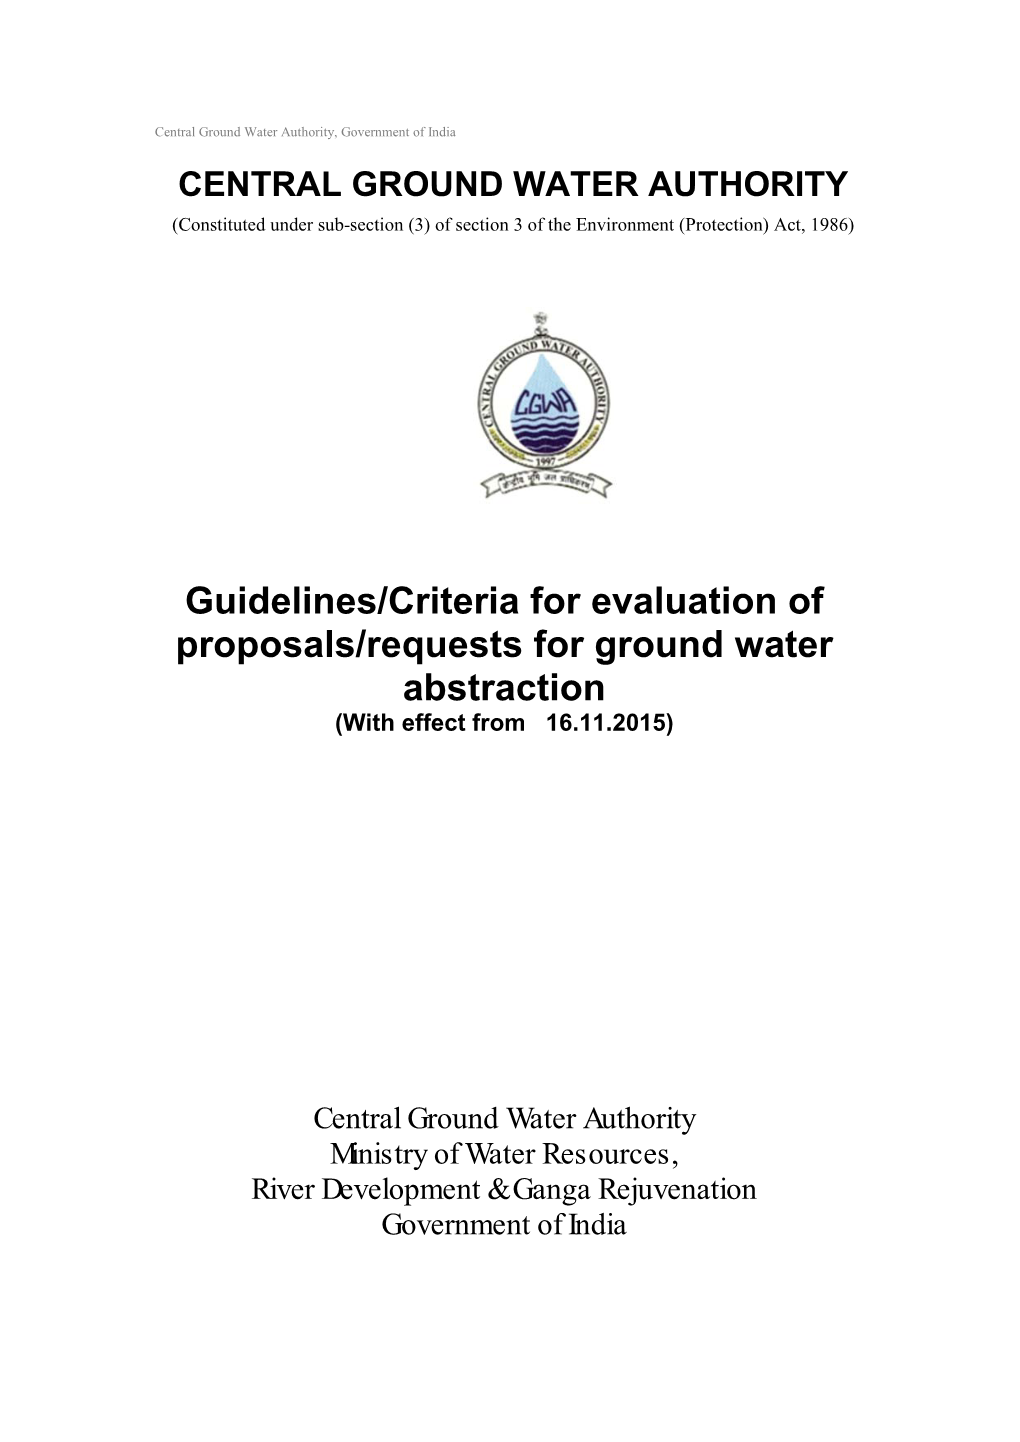 Guidelines/Criteria for Evaluation of Proposals/Requests for Ground Water Abstraction (With Effect from 16.11.2015)